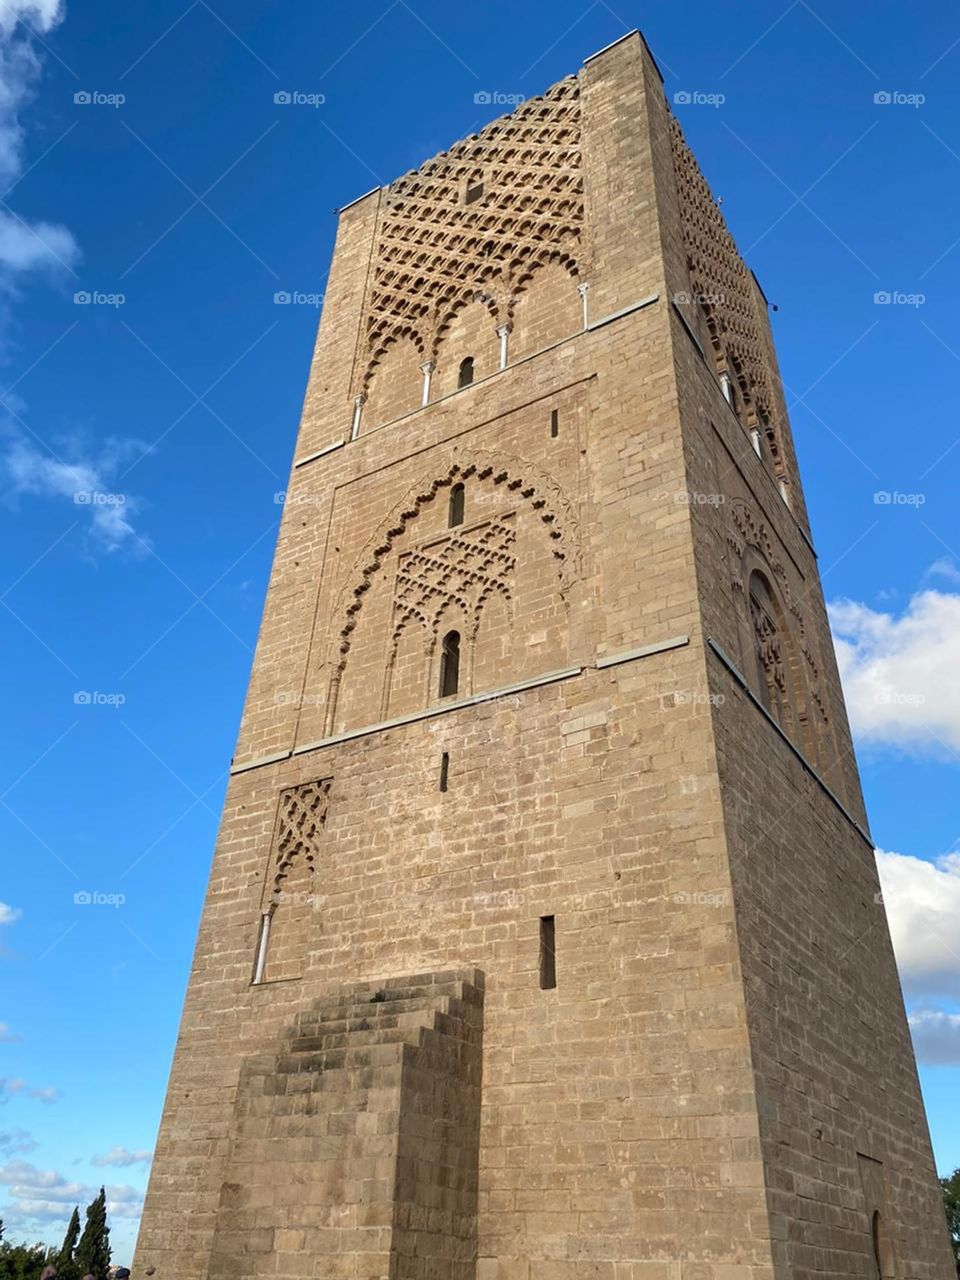 Hassan tower